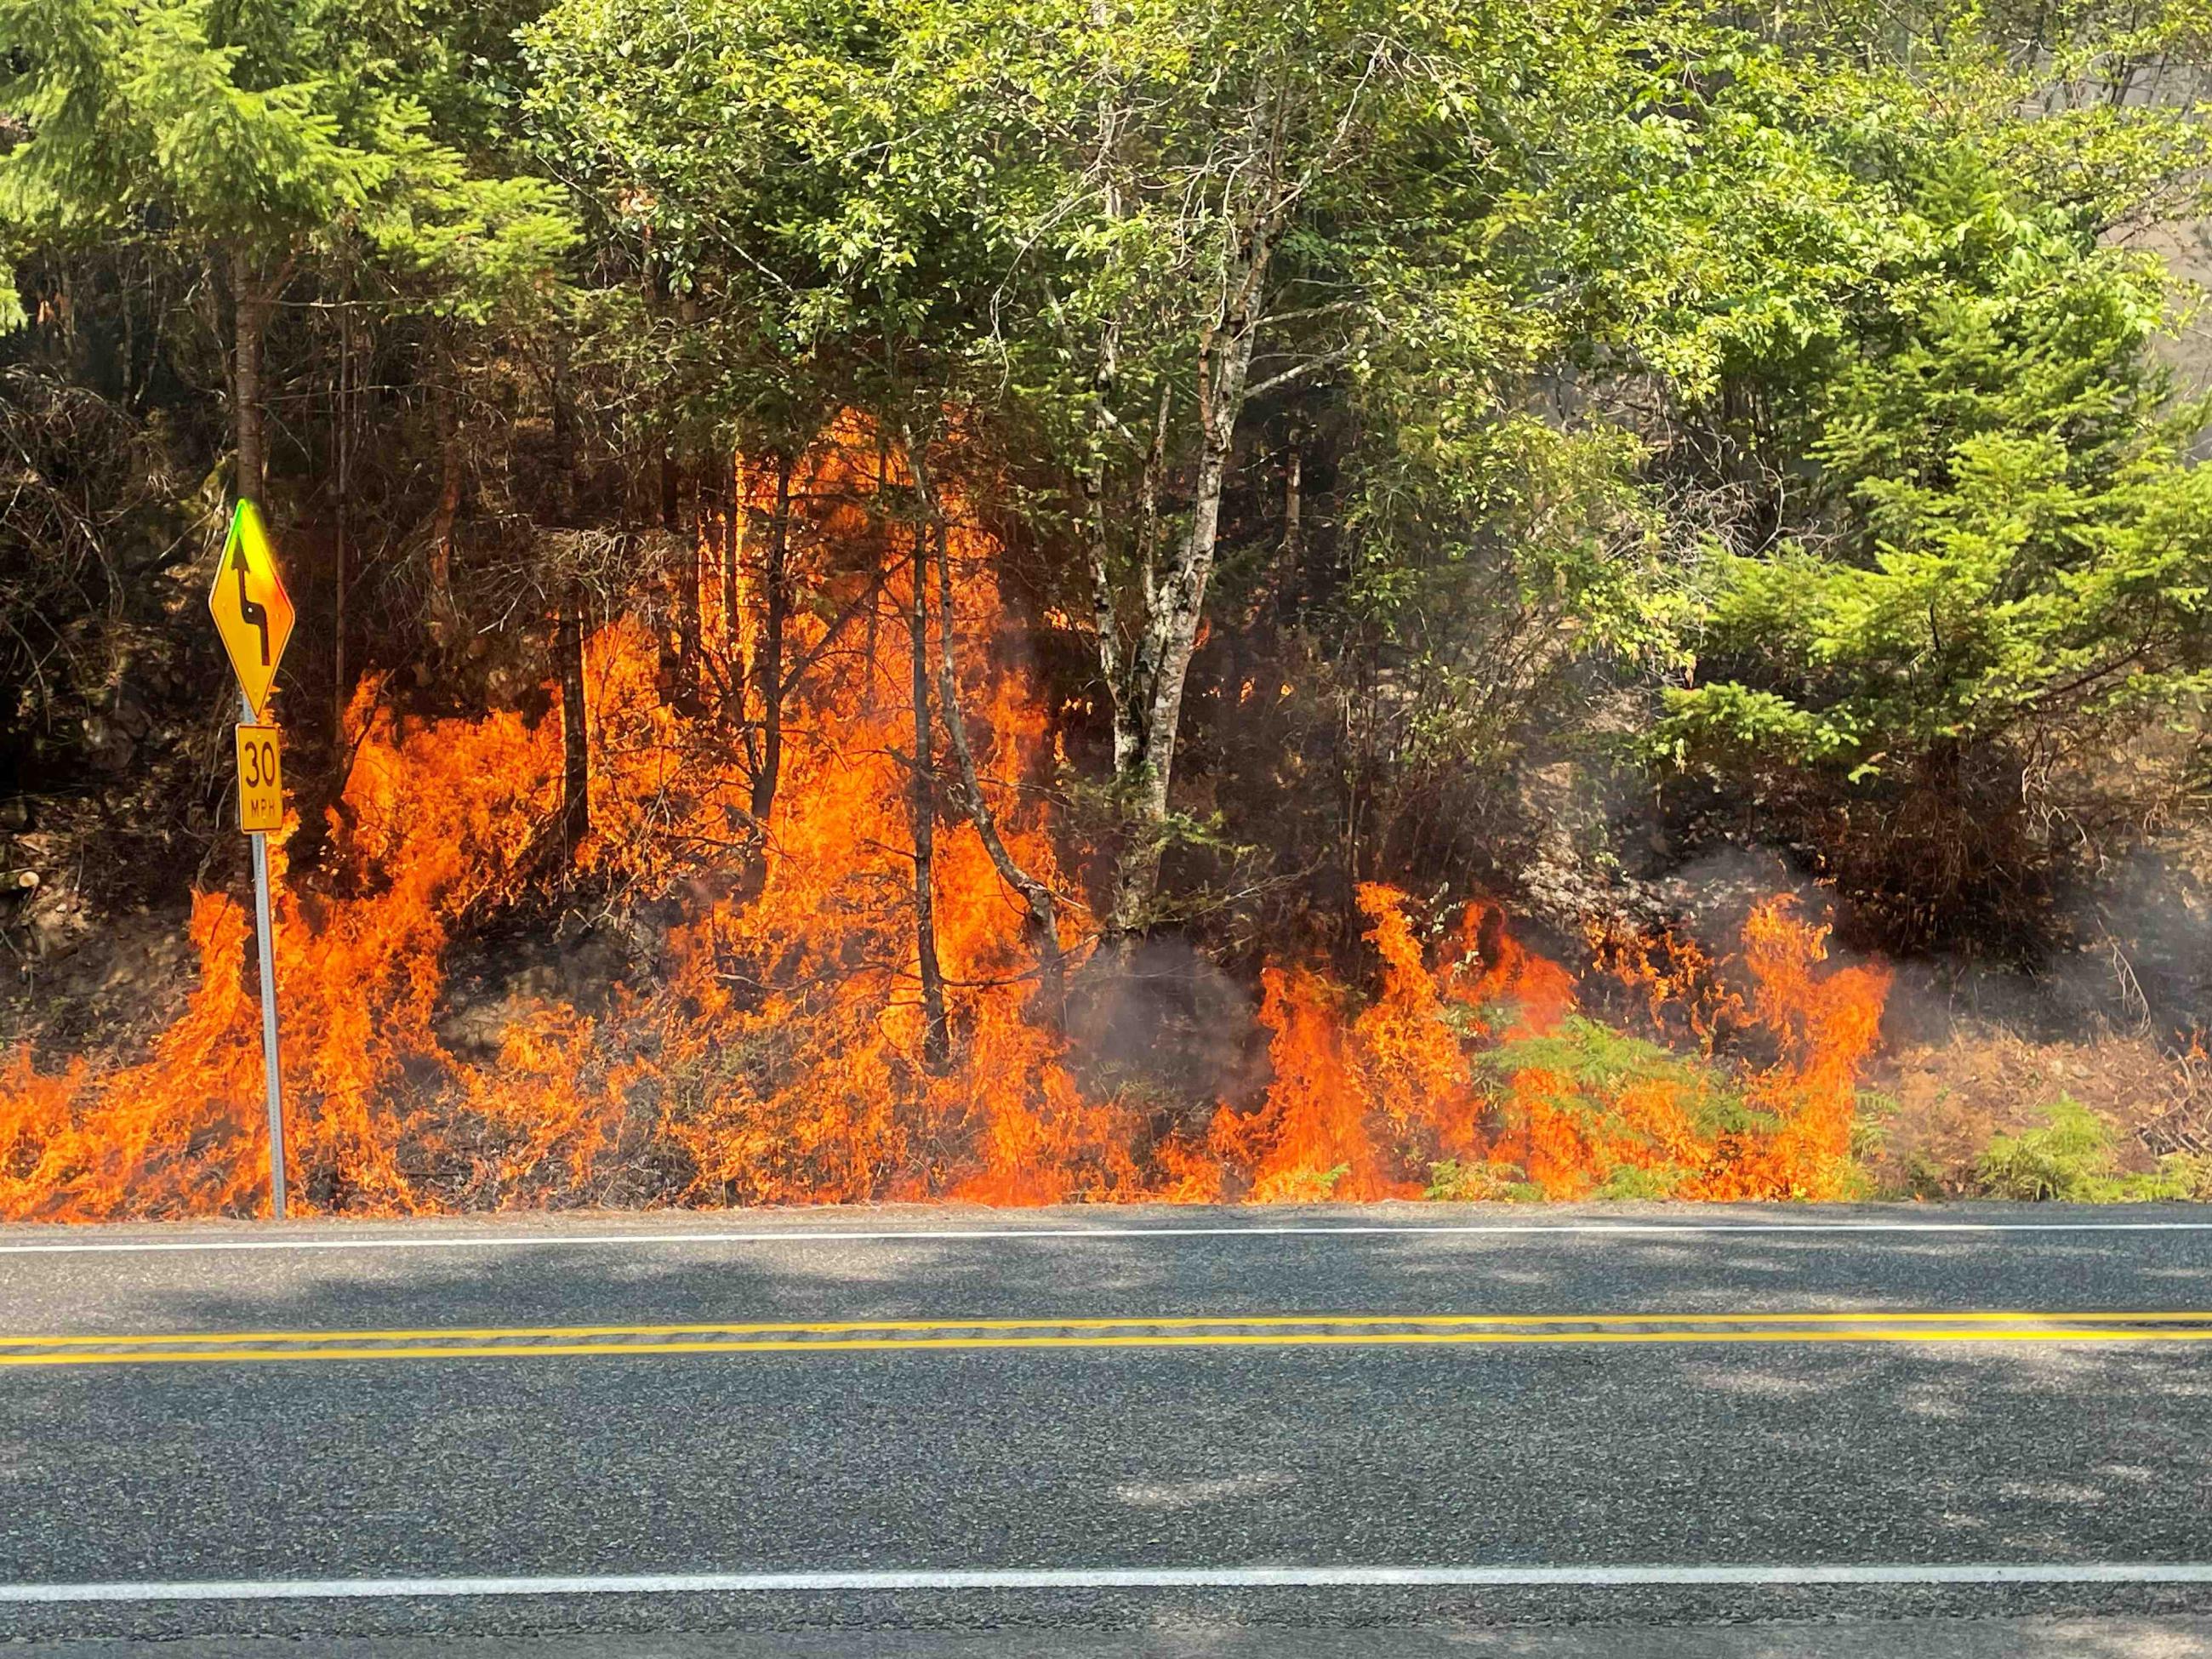 A roadway lies in the foreground and flames stretch across the length of the frame, fed by the brush and trees between the road and the area's steep, rocky hillsides